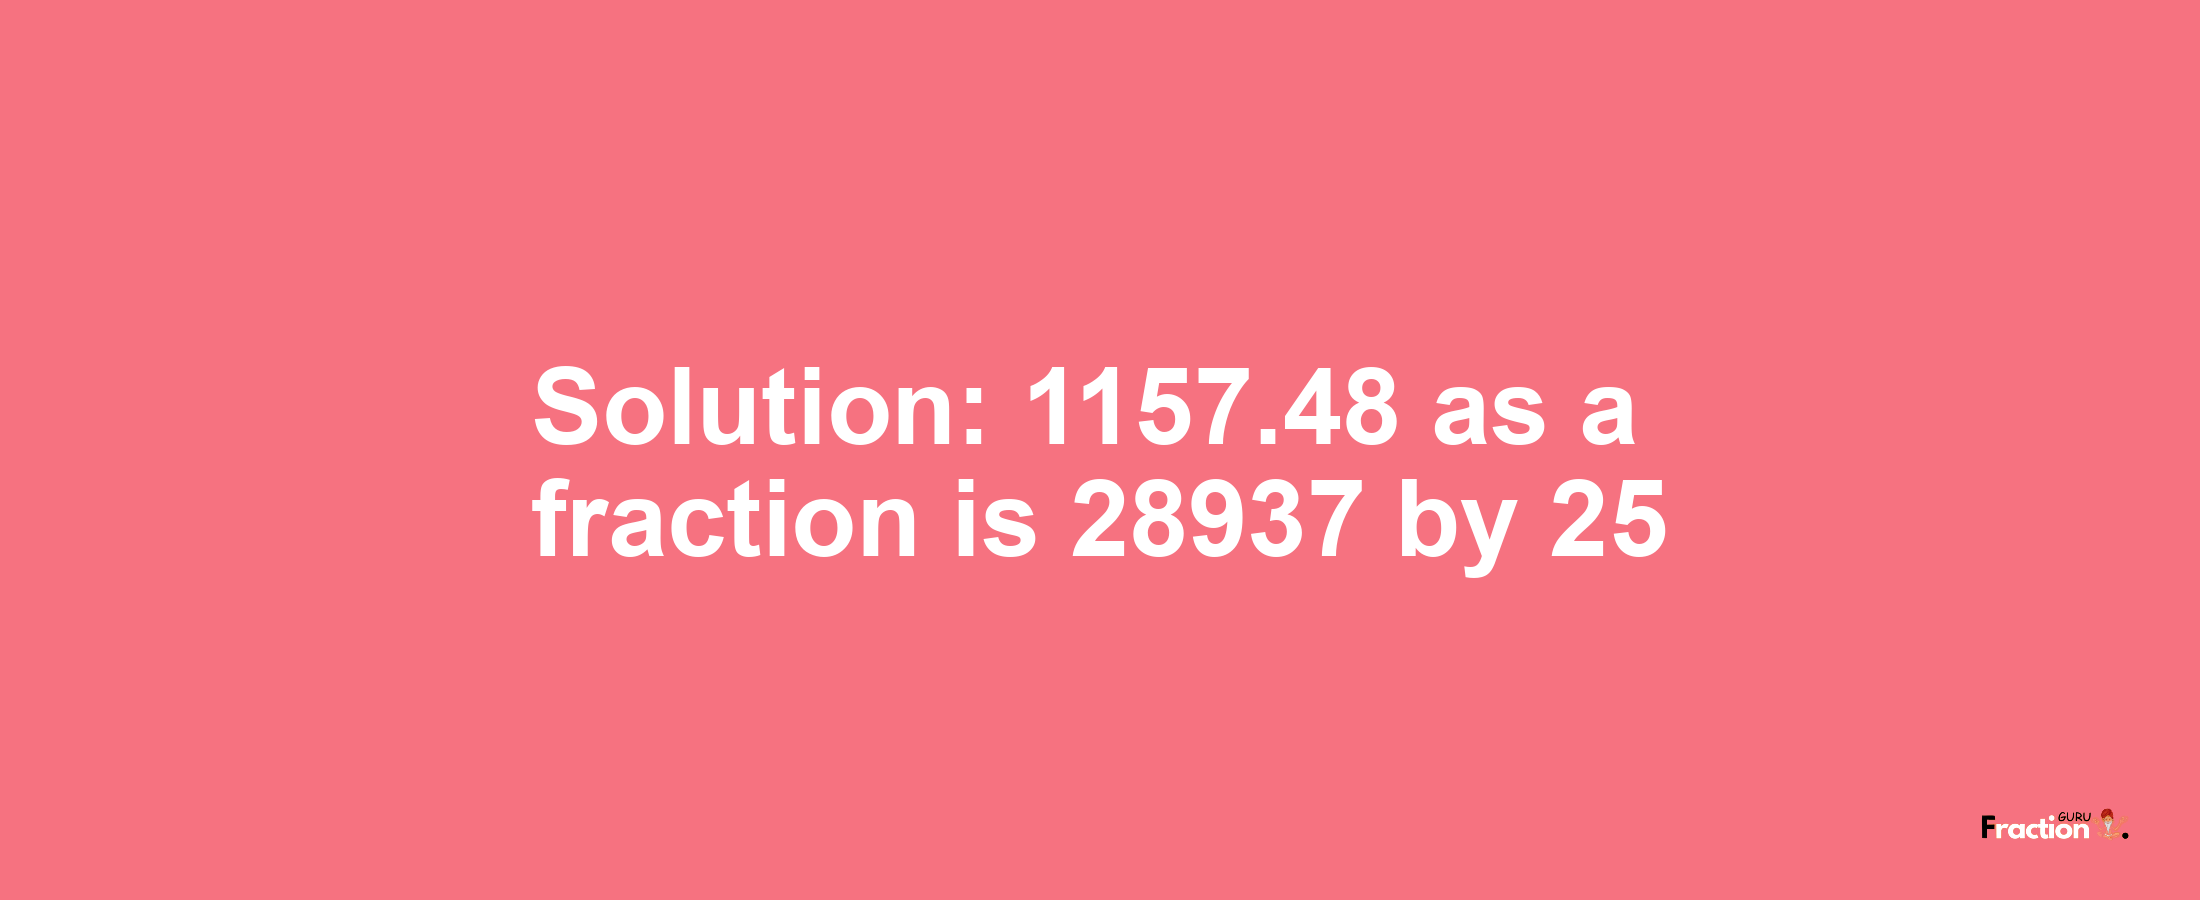 Solution:1157.48 as a fraction is 28937/25